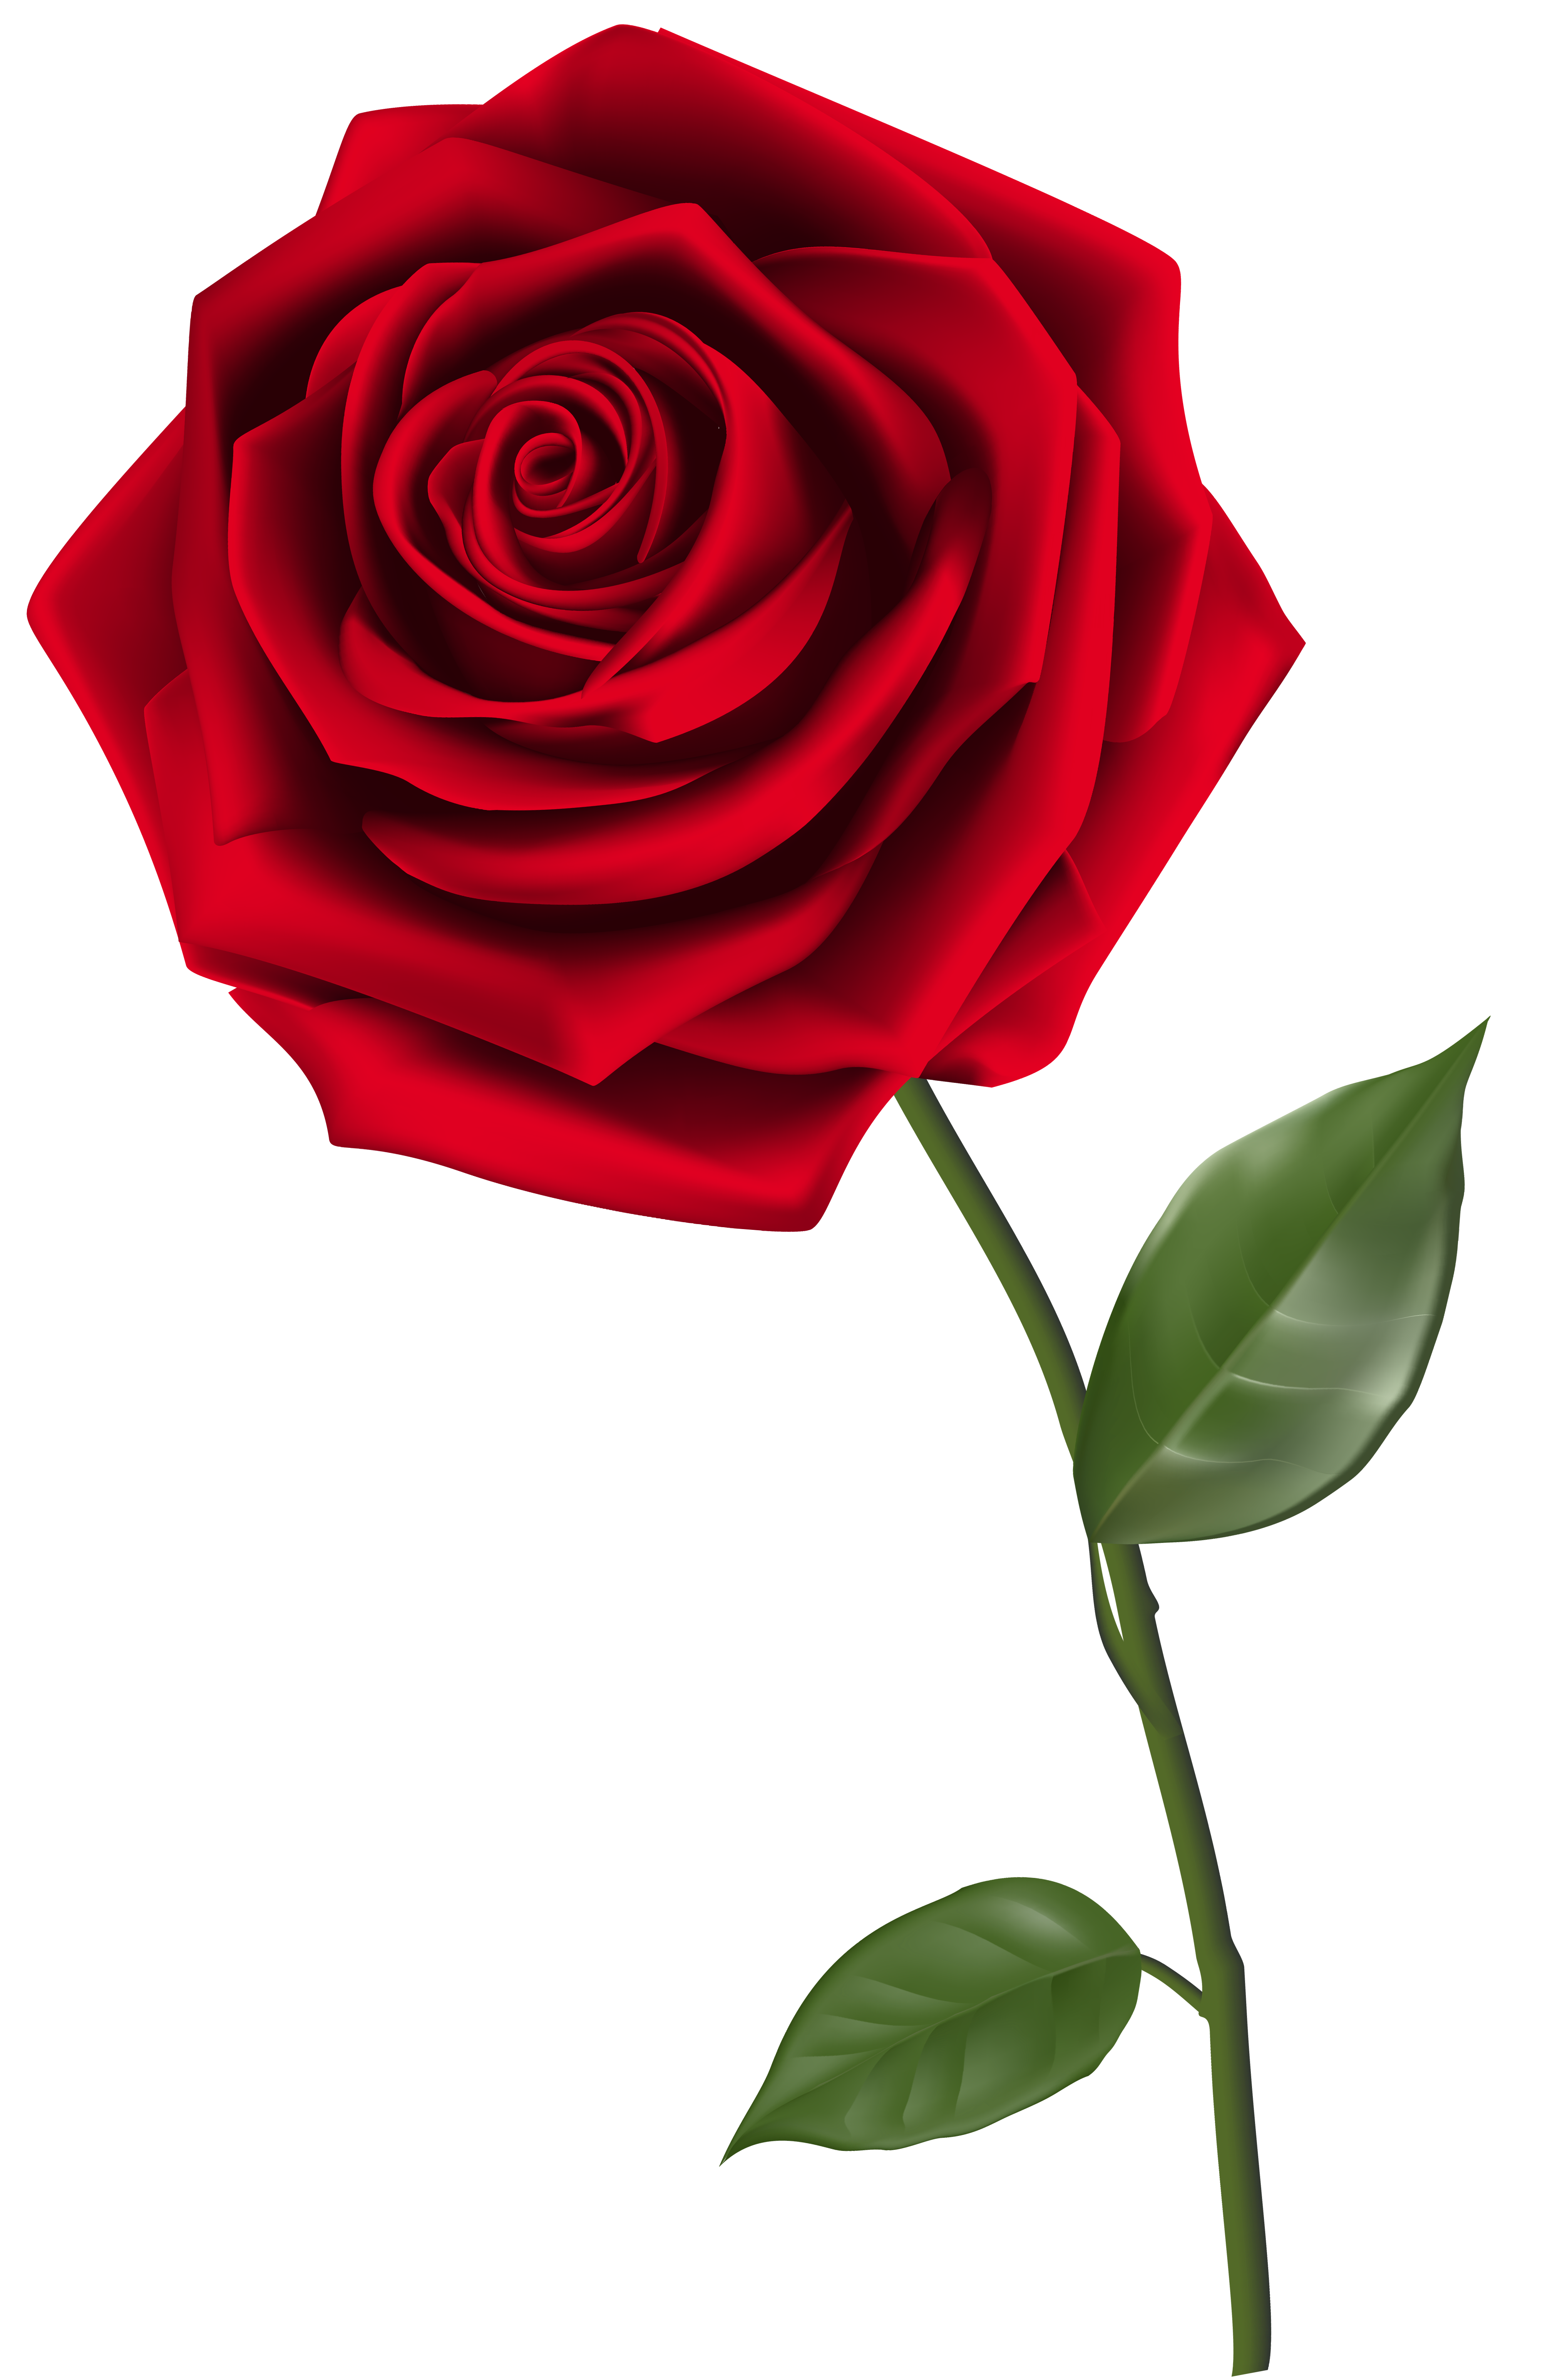 Single Red Rose PNG Clipart Image.